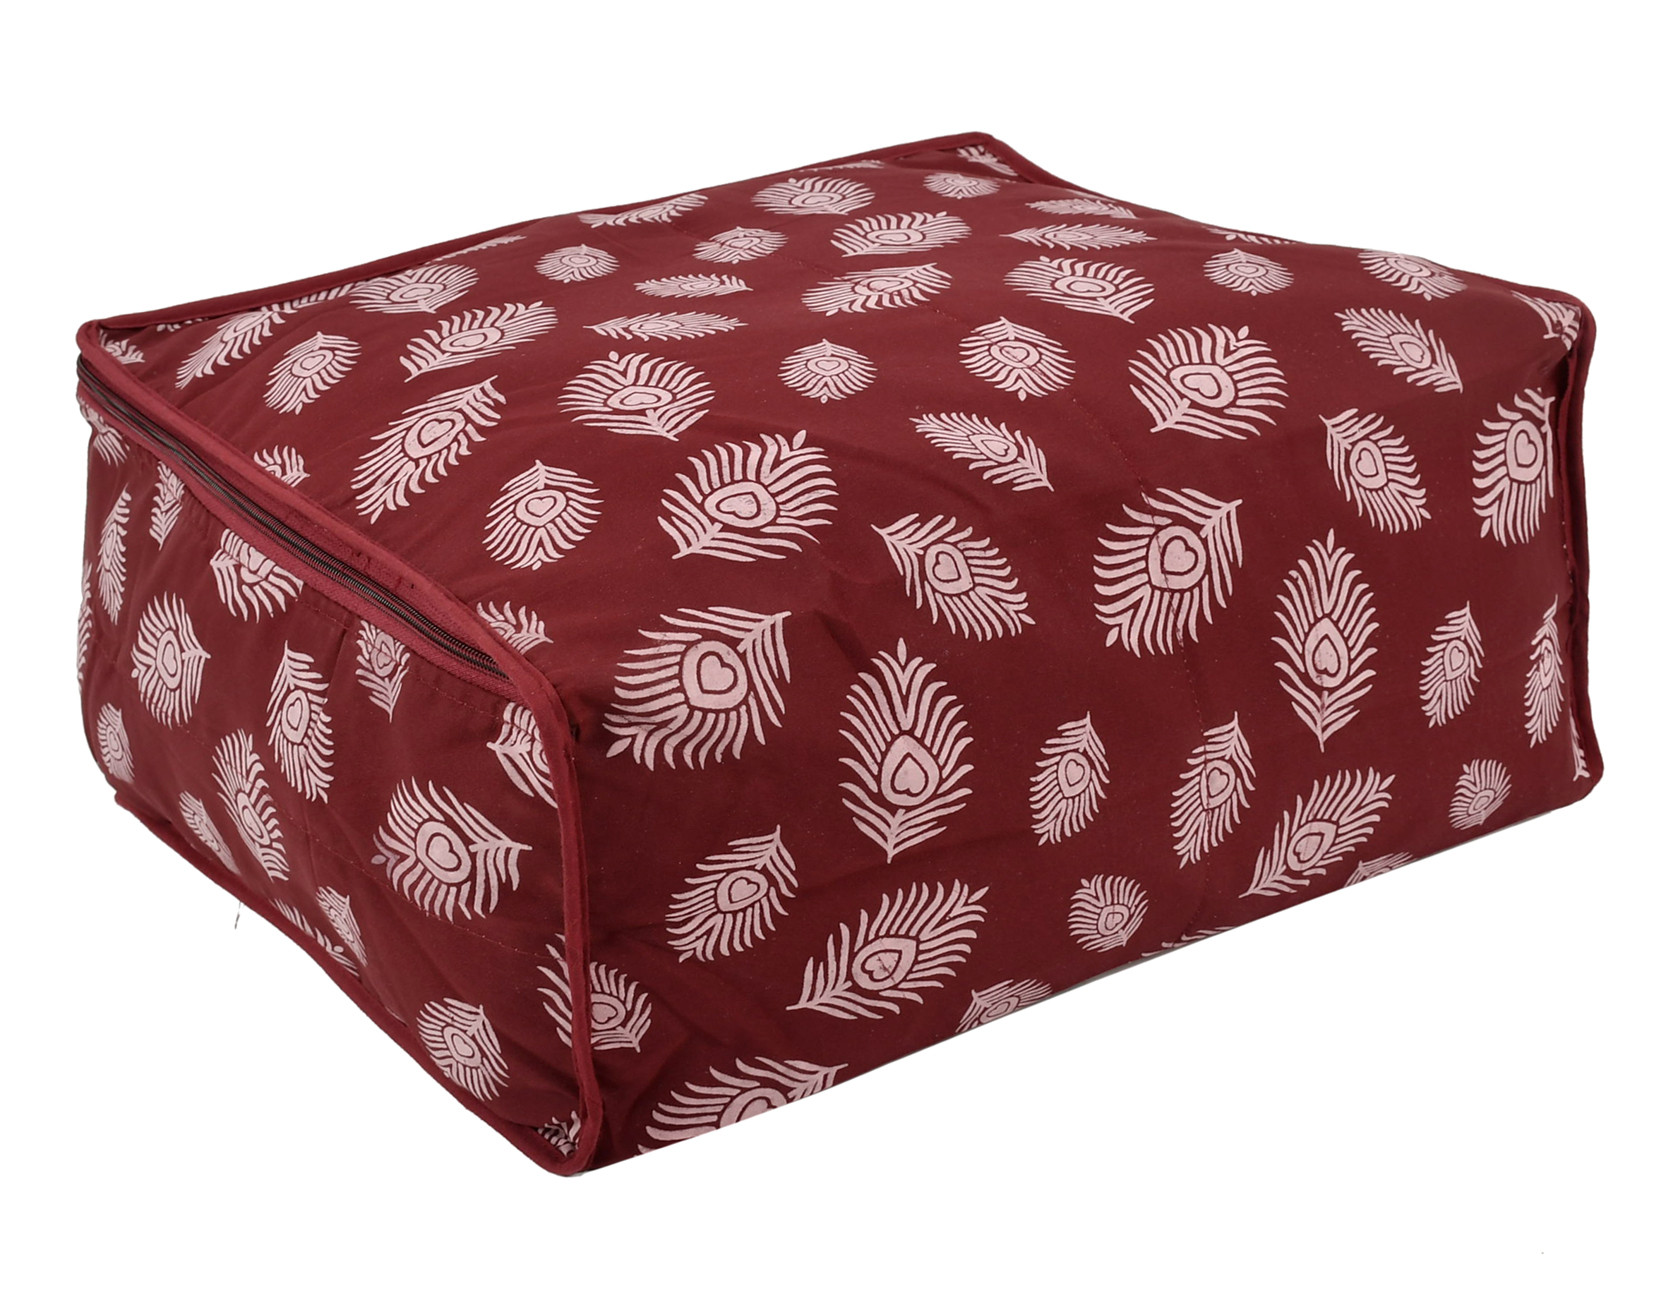 Kuber Industries Leaf Printed Saree Cover/Clothes Organiser For Wardrobe With Transparent Window,(Maroon)